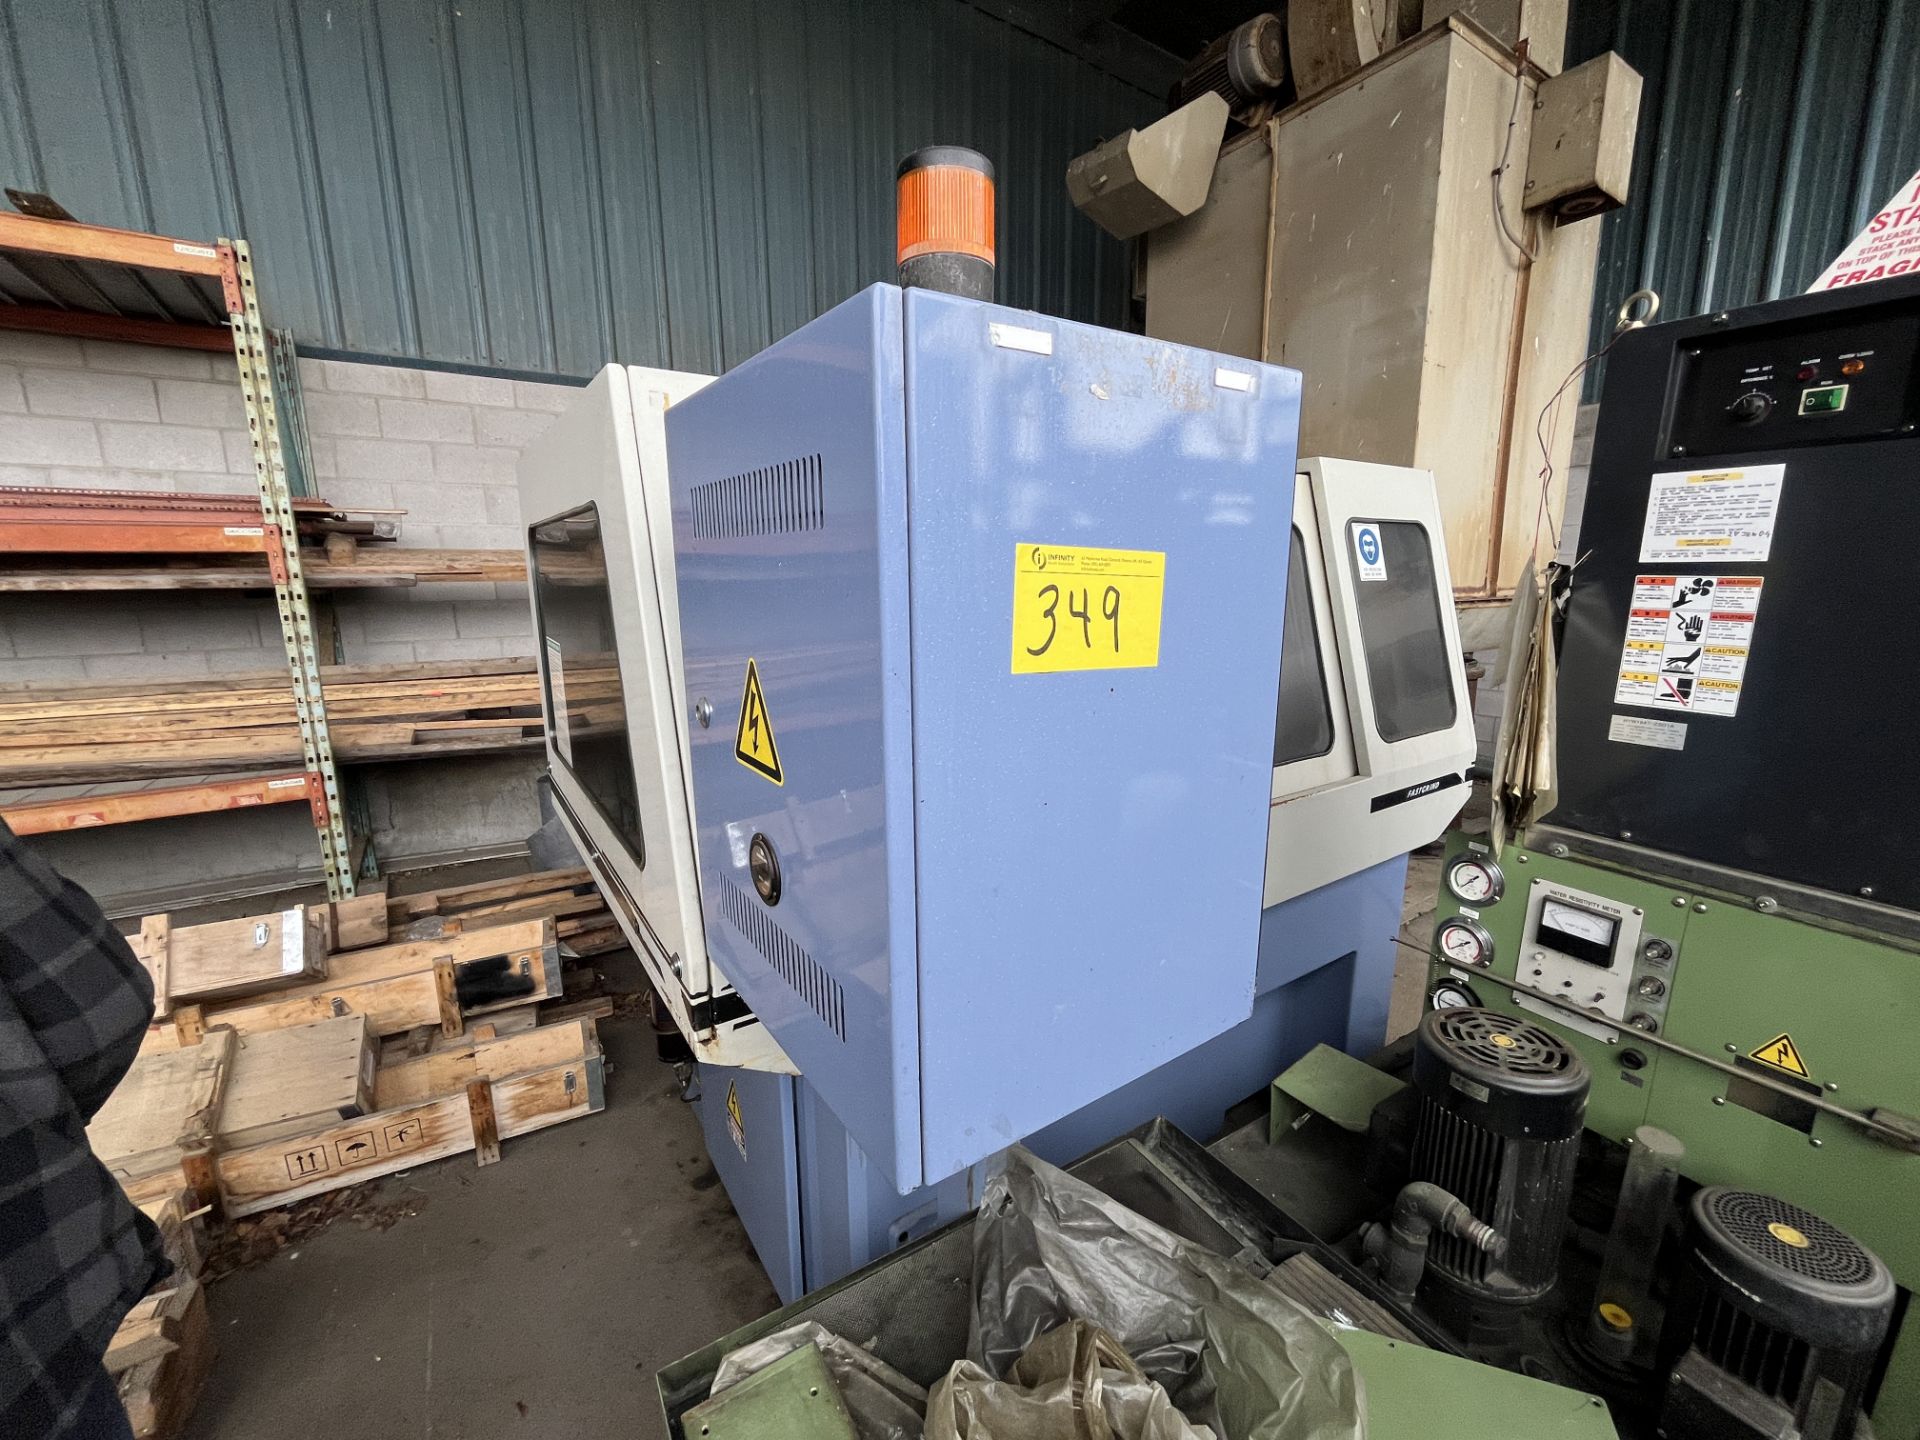 ANCA SYS 32CNC PG4 CNC GRINDER, CNC CONTROL, S/N 322718 (LOCATED AT 1761 BISHOP STREET N, CAMBRIDGE, - Image 3 of 10